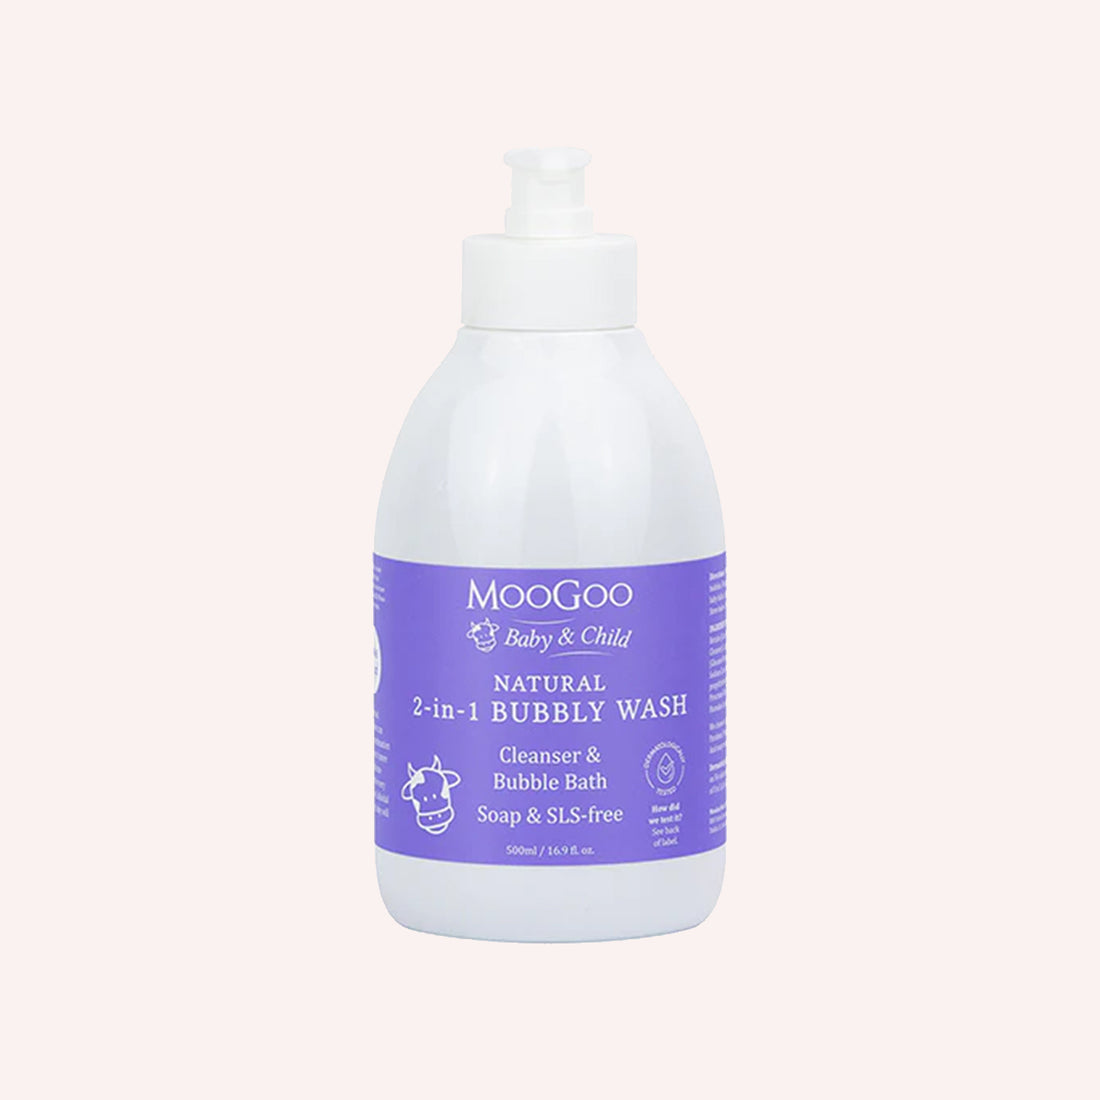 2-in-1 Bubbly Wash - 500ml